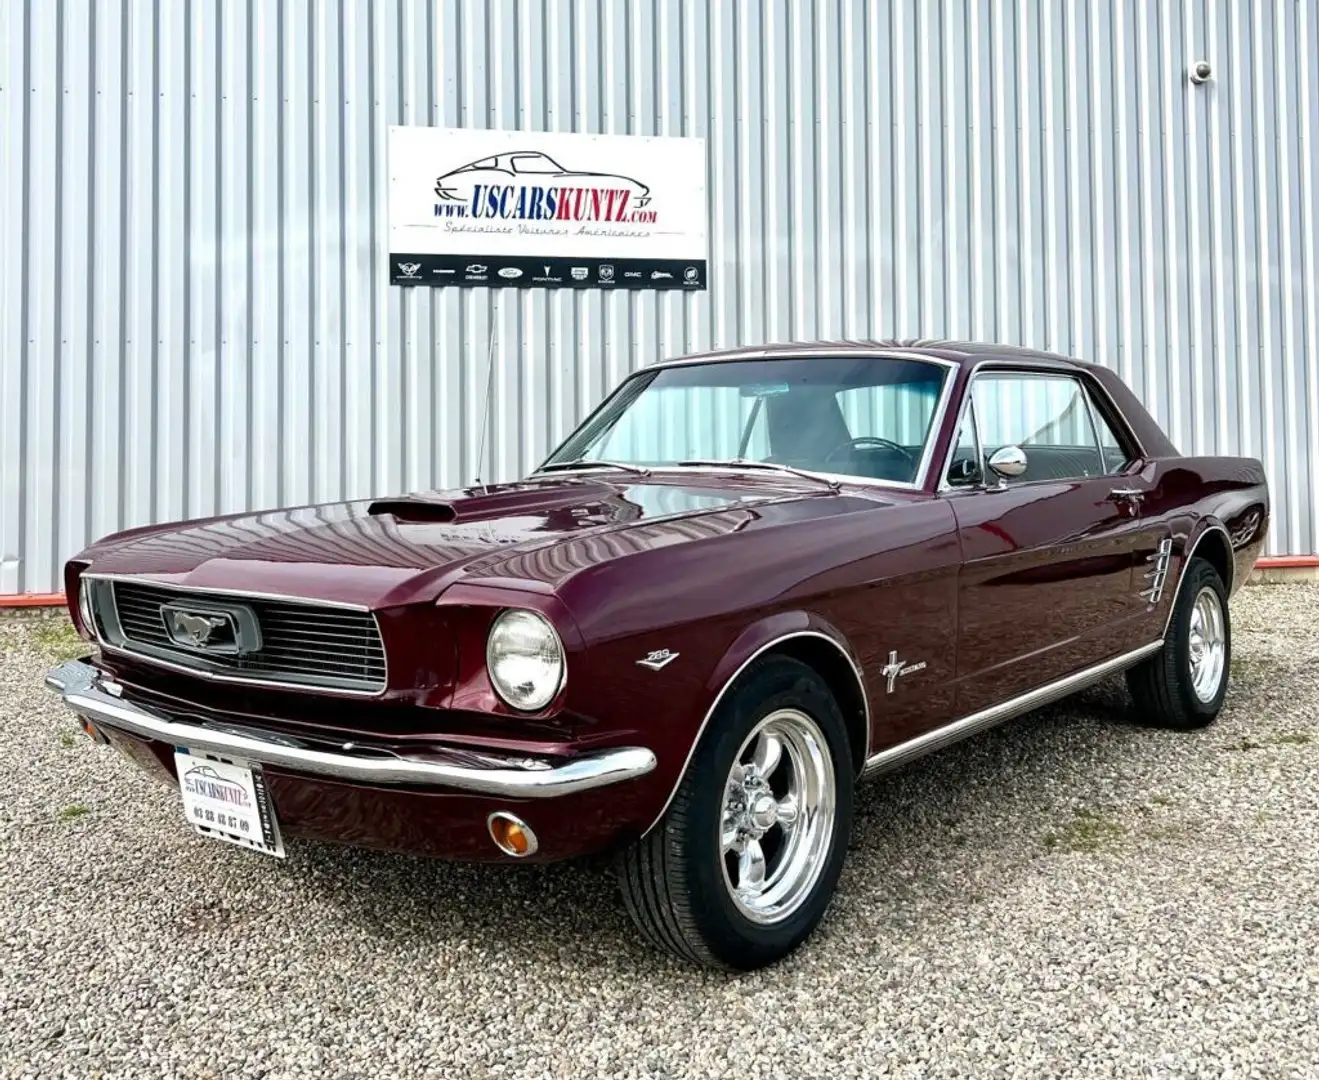 Ford Mustang Coupé 1966 Goud - 1